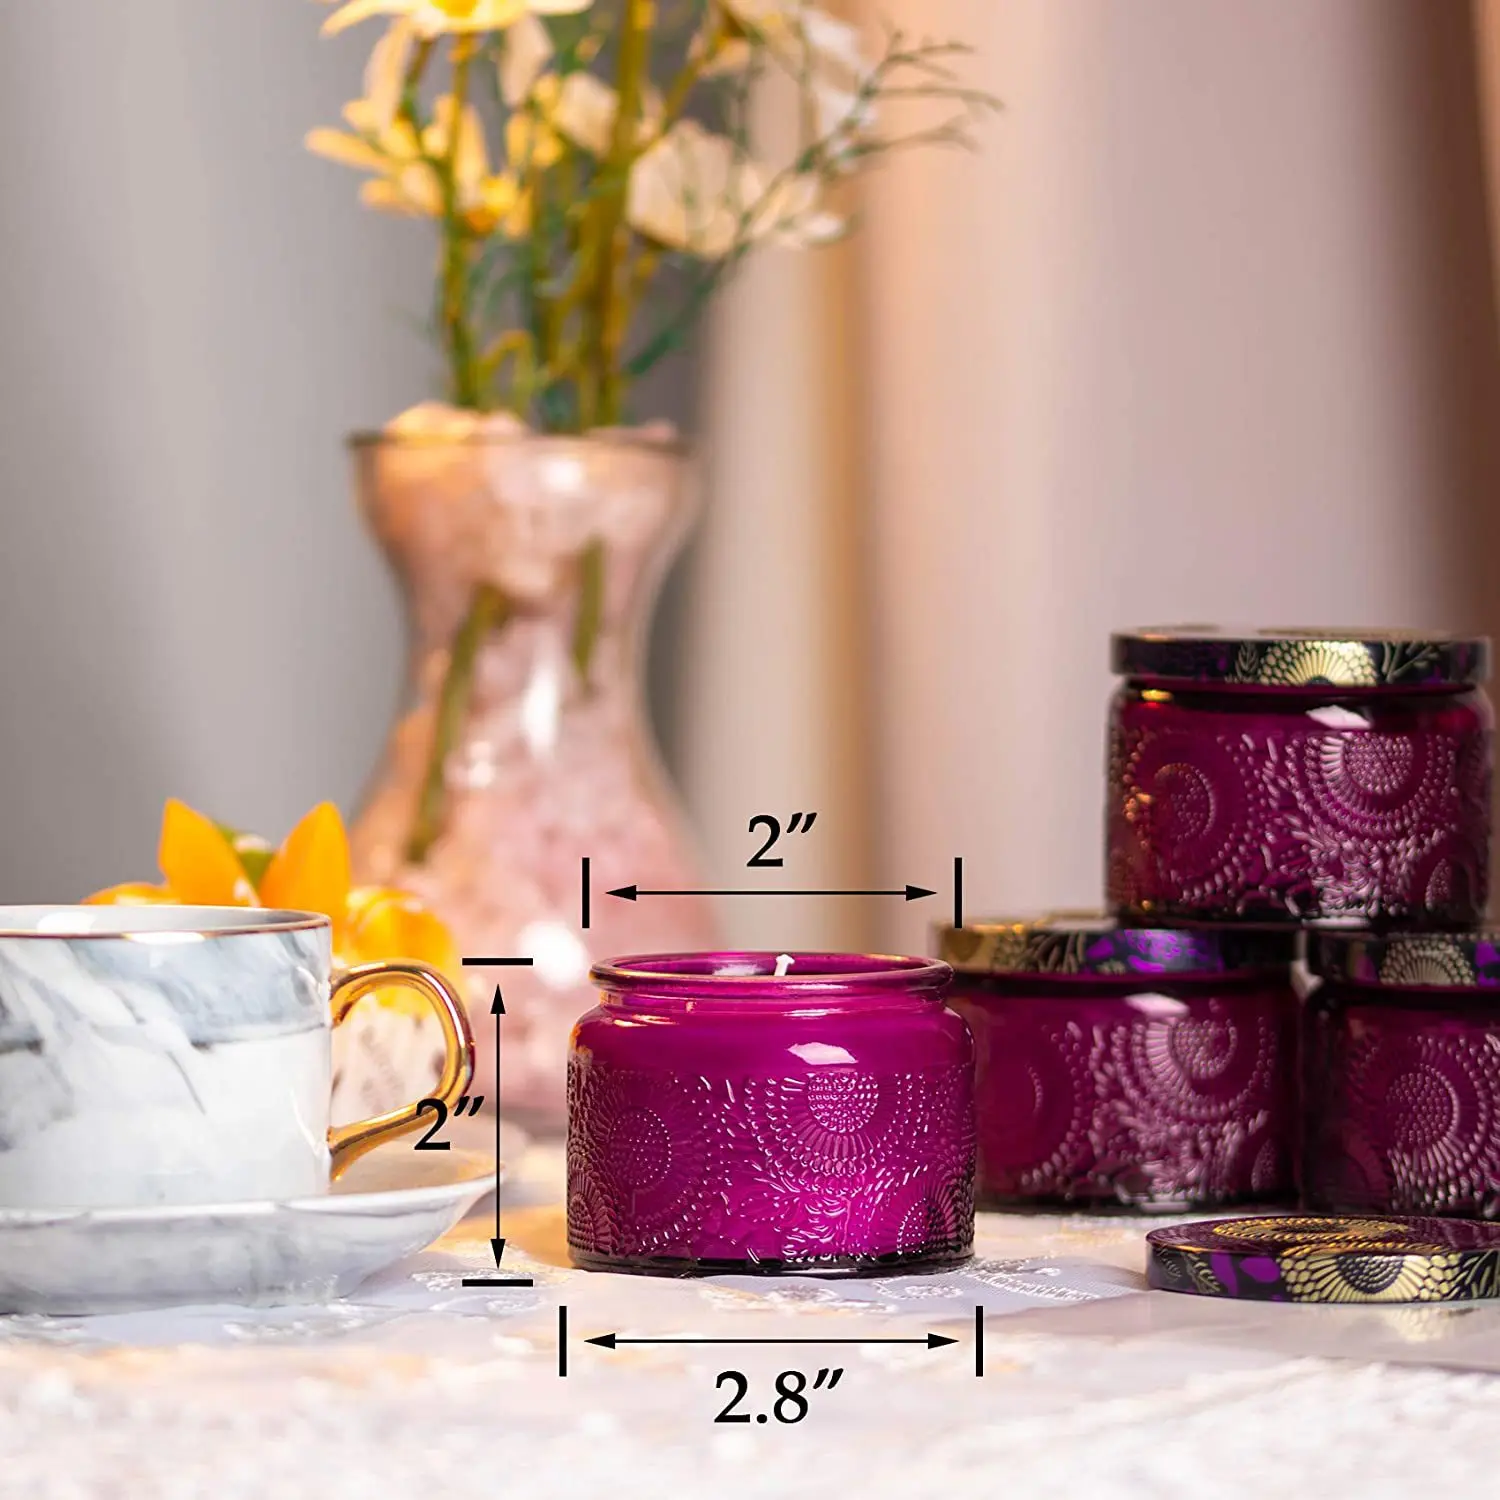 JD-C-1613 Hot 120ml embossed round pattern candle jar Colored scented candle holder embossed glass candle cup with lid purple